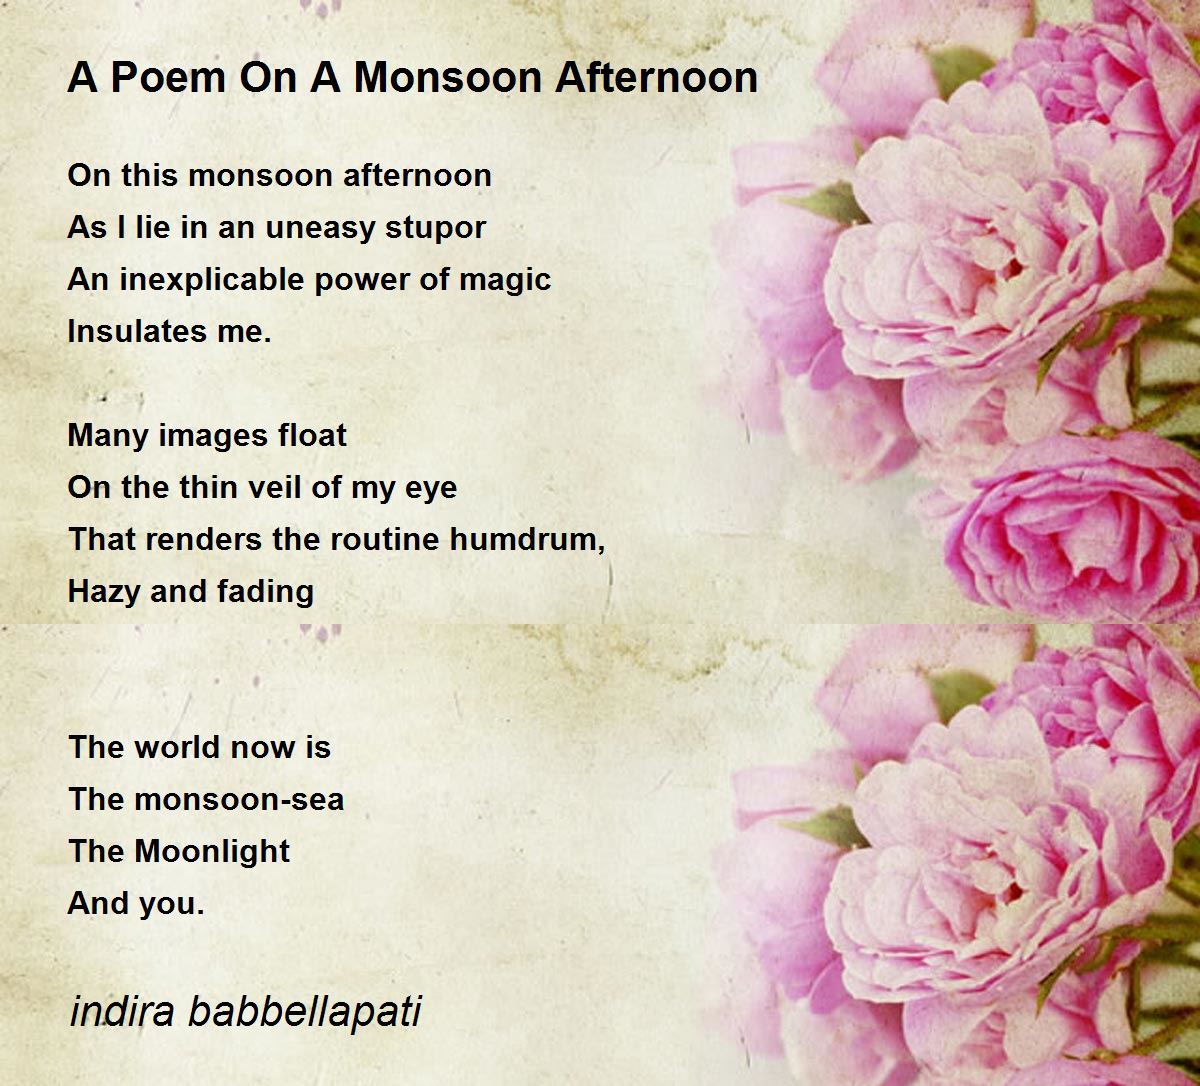 A Poem On A Monsoon Afternoon Poem by indira babbellapati - Poem ...